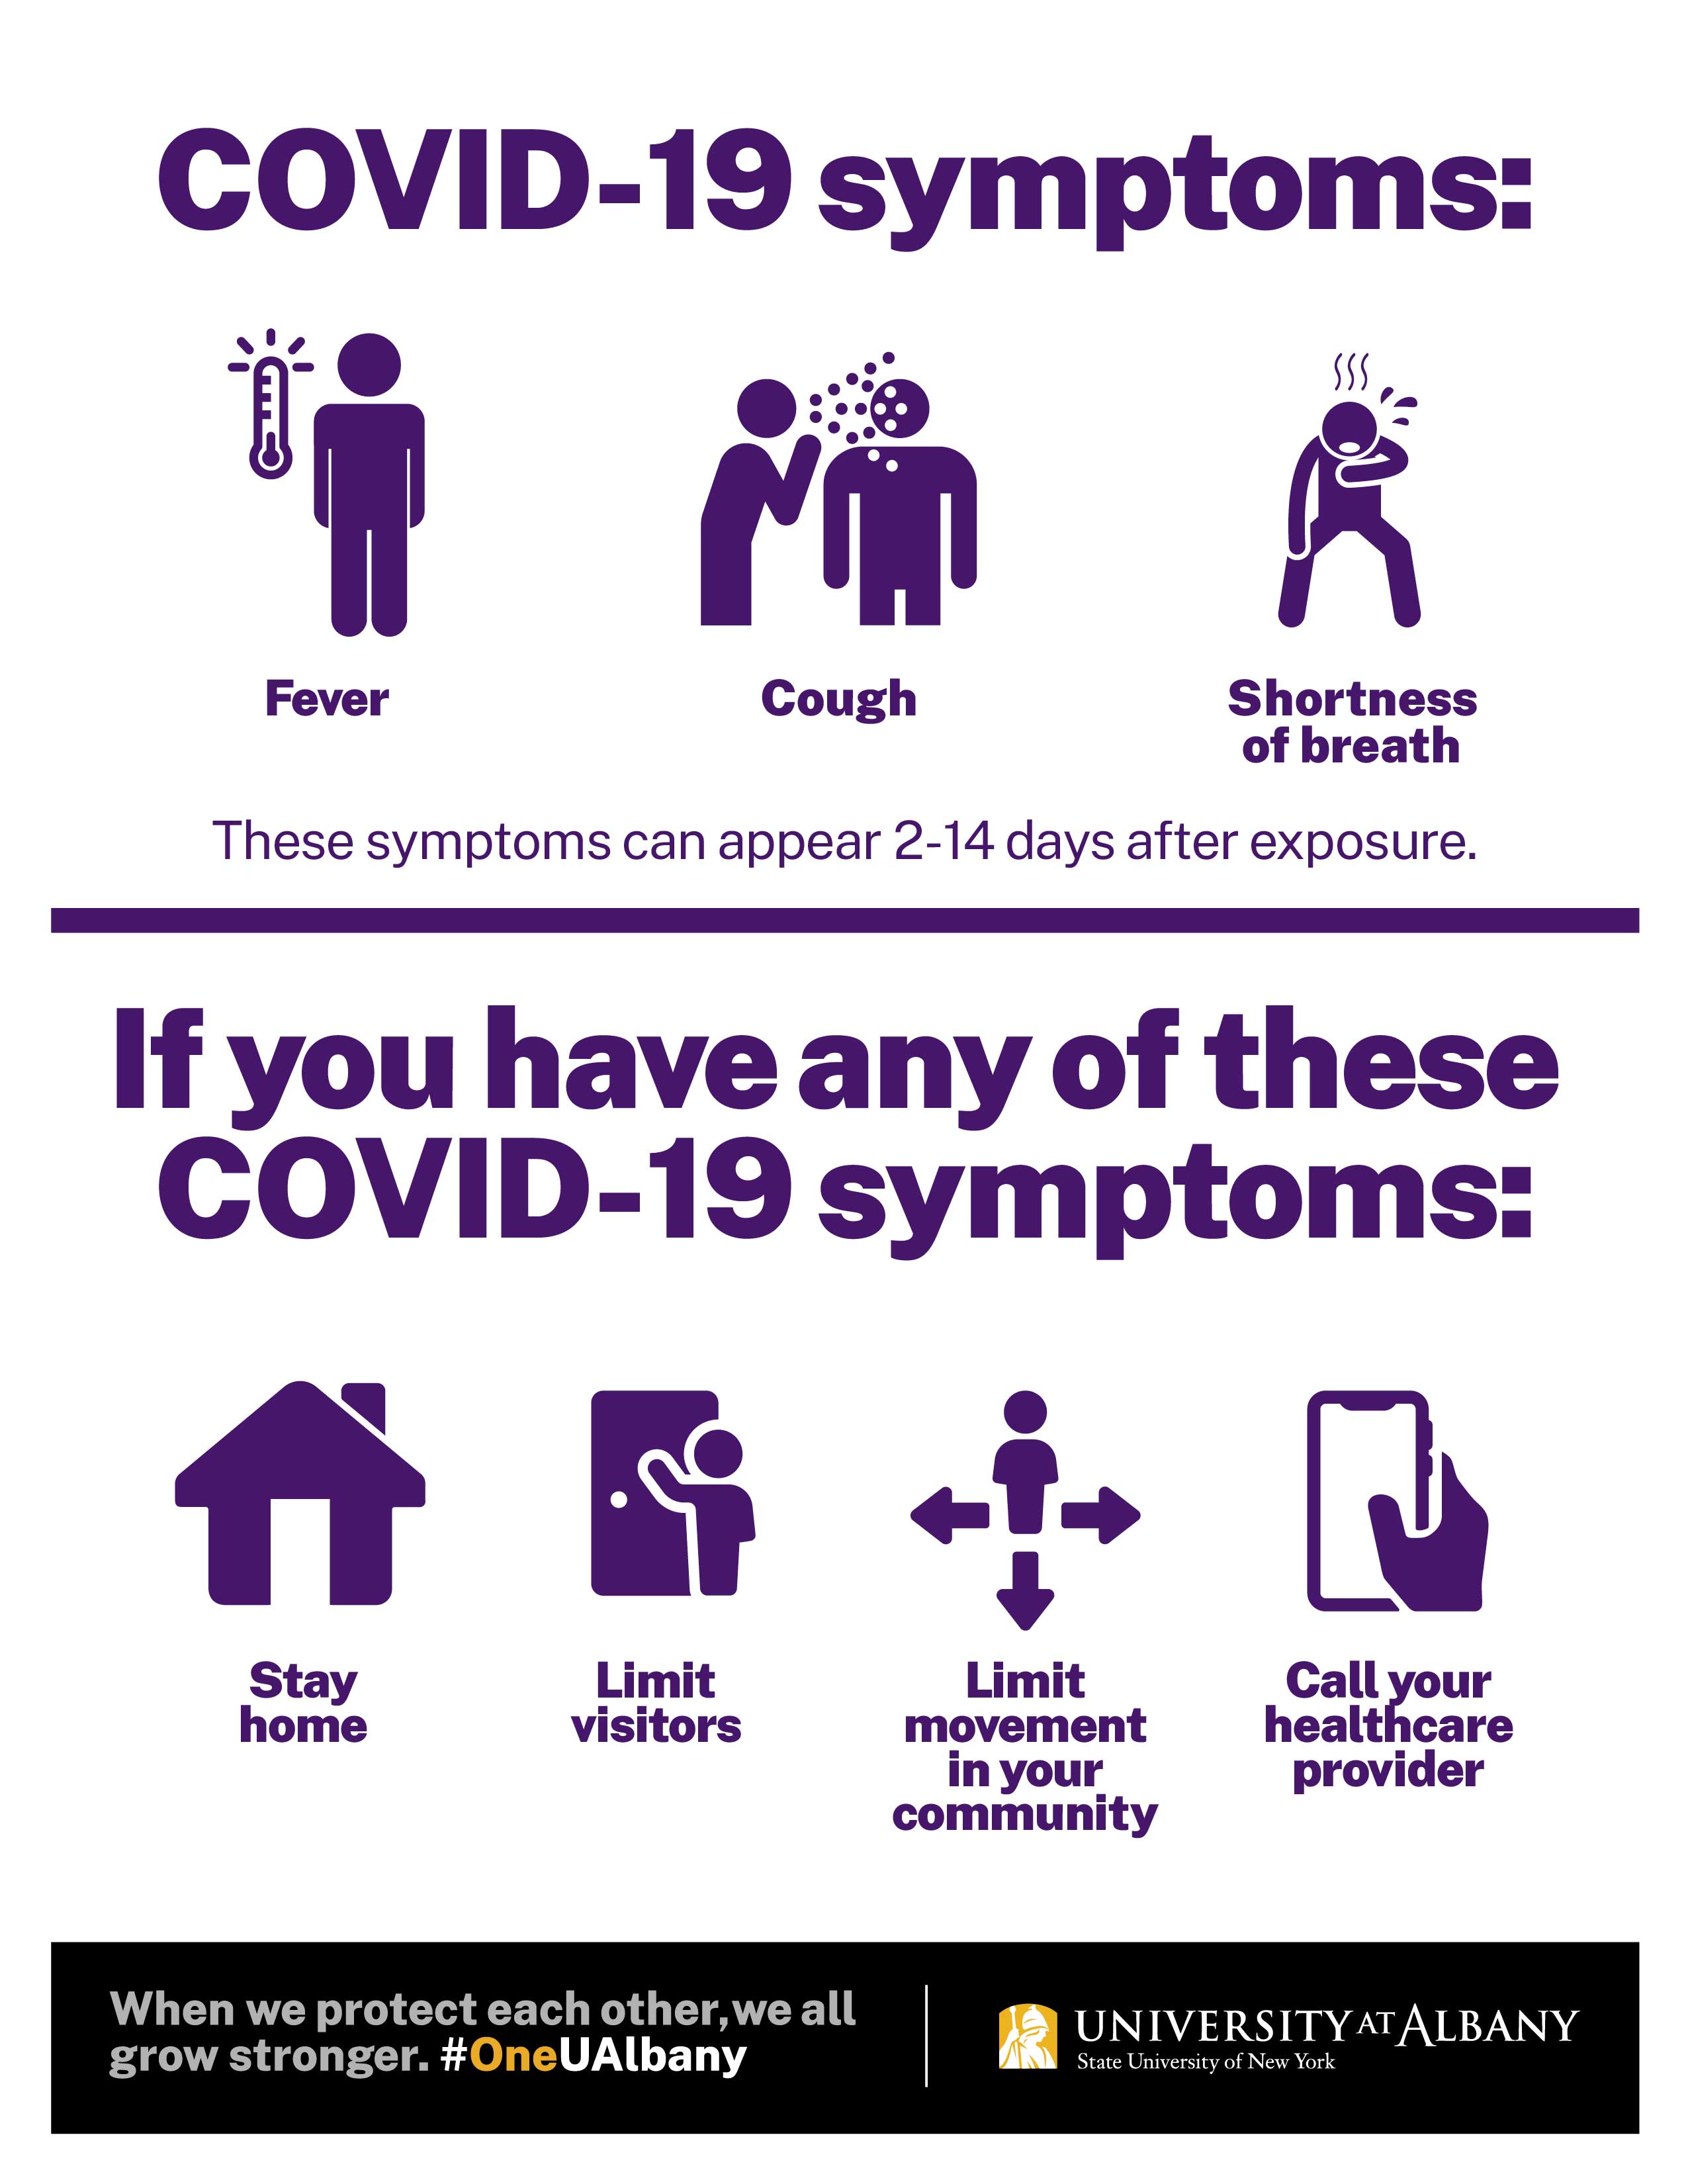 COVID-19 Symptoms: Fever, Cough, Shortness of breath. These symptoms can appear 2-14 days after exposure. If you have any of these COVID-19 symptoms: Stay home, Limit visitors, Limit movement in your community, call your healthcare provider.